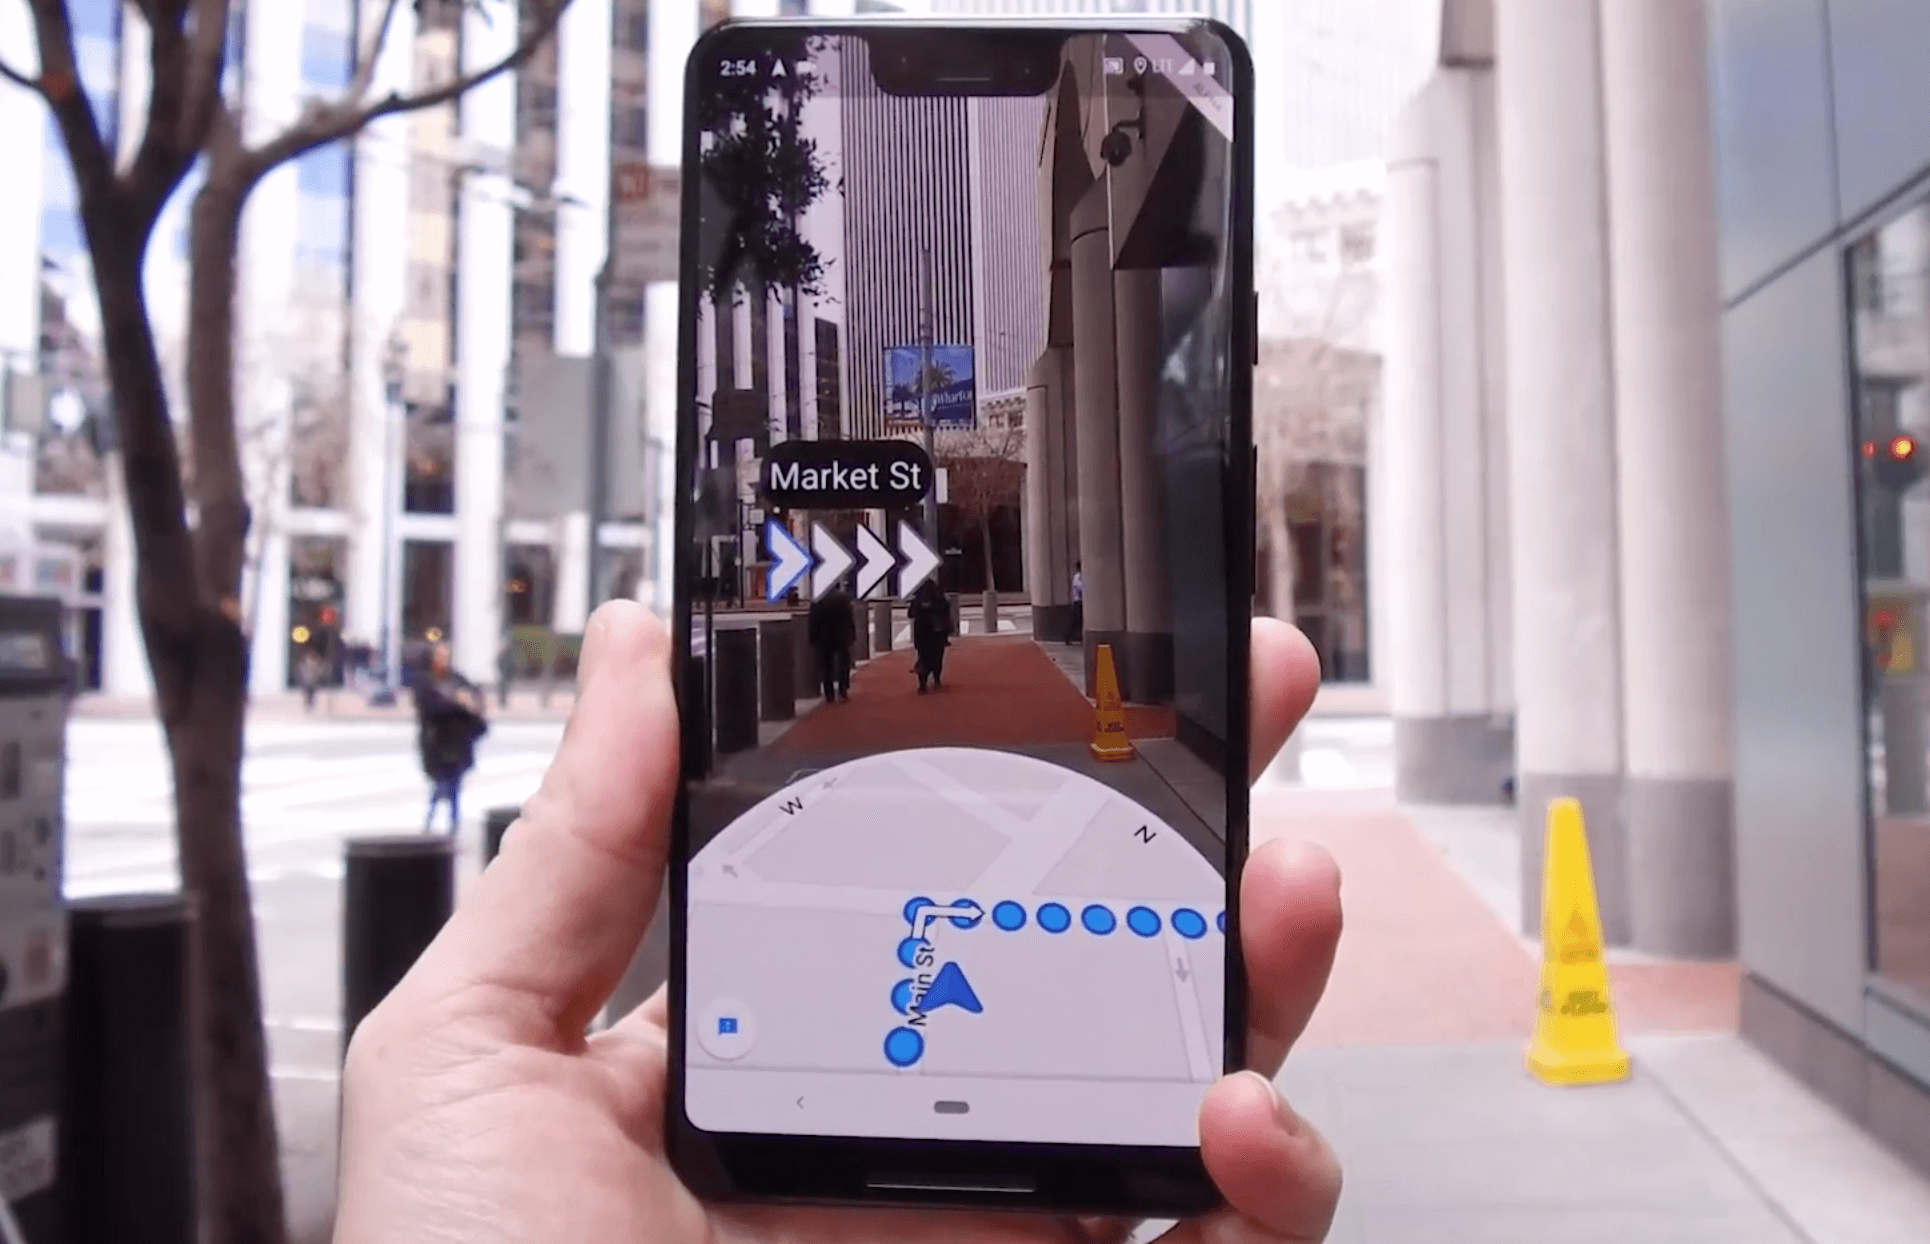 New Augmented Reality feature added to Live View